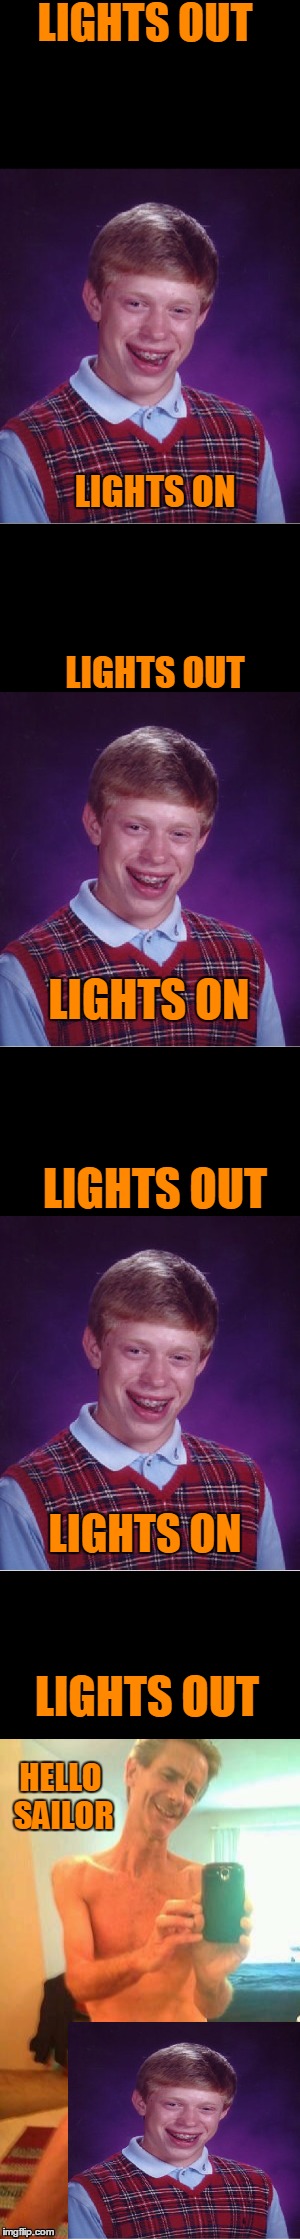 Lights out week. | LIGHTS OUT; LIGHTS ON; LIGHTS OUT; LIGHTS ON; LIGHTS OUT; LIGHTS ON; LIGHTS OUT; HELLO SAILOR | image tagged in lights out week | made w/ Imgflip meme maker